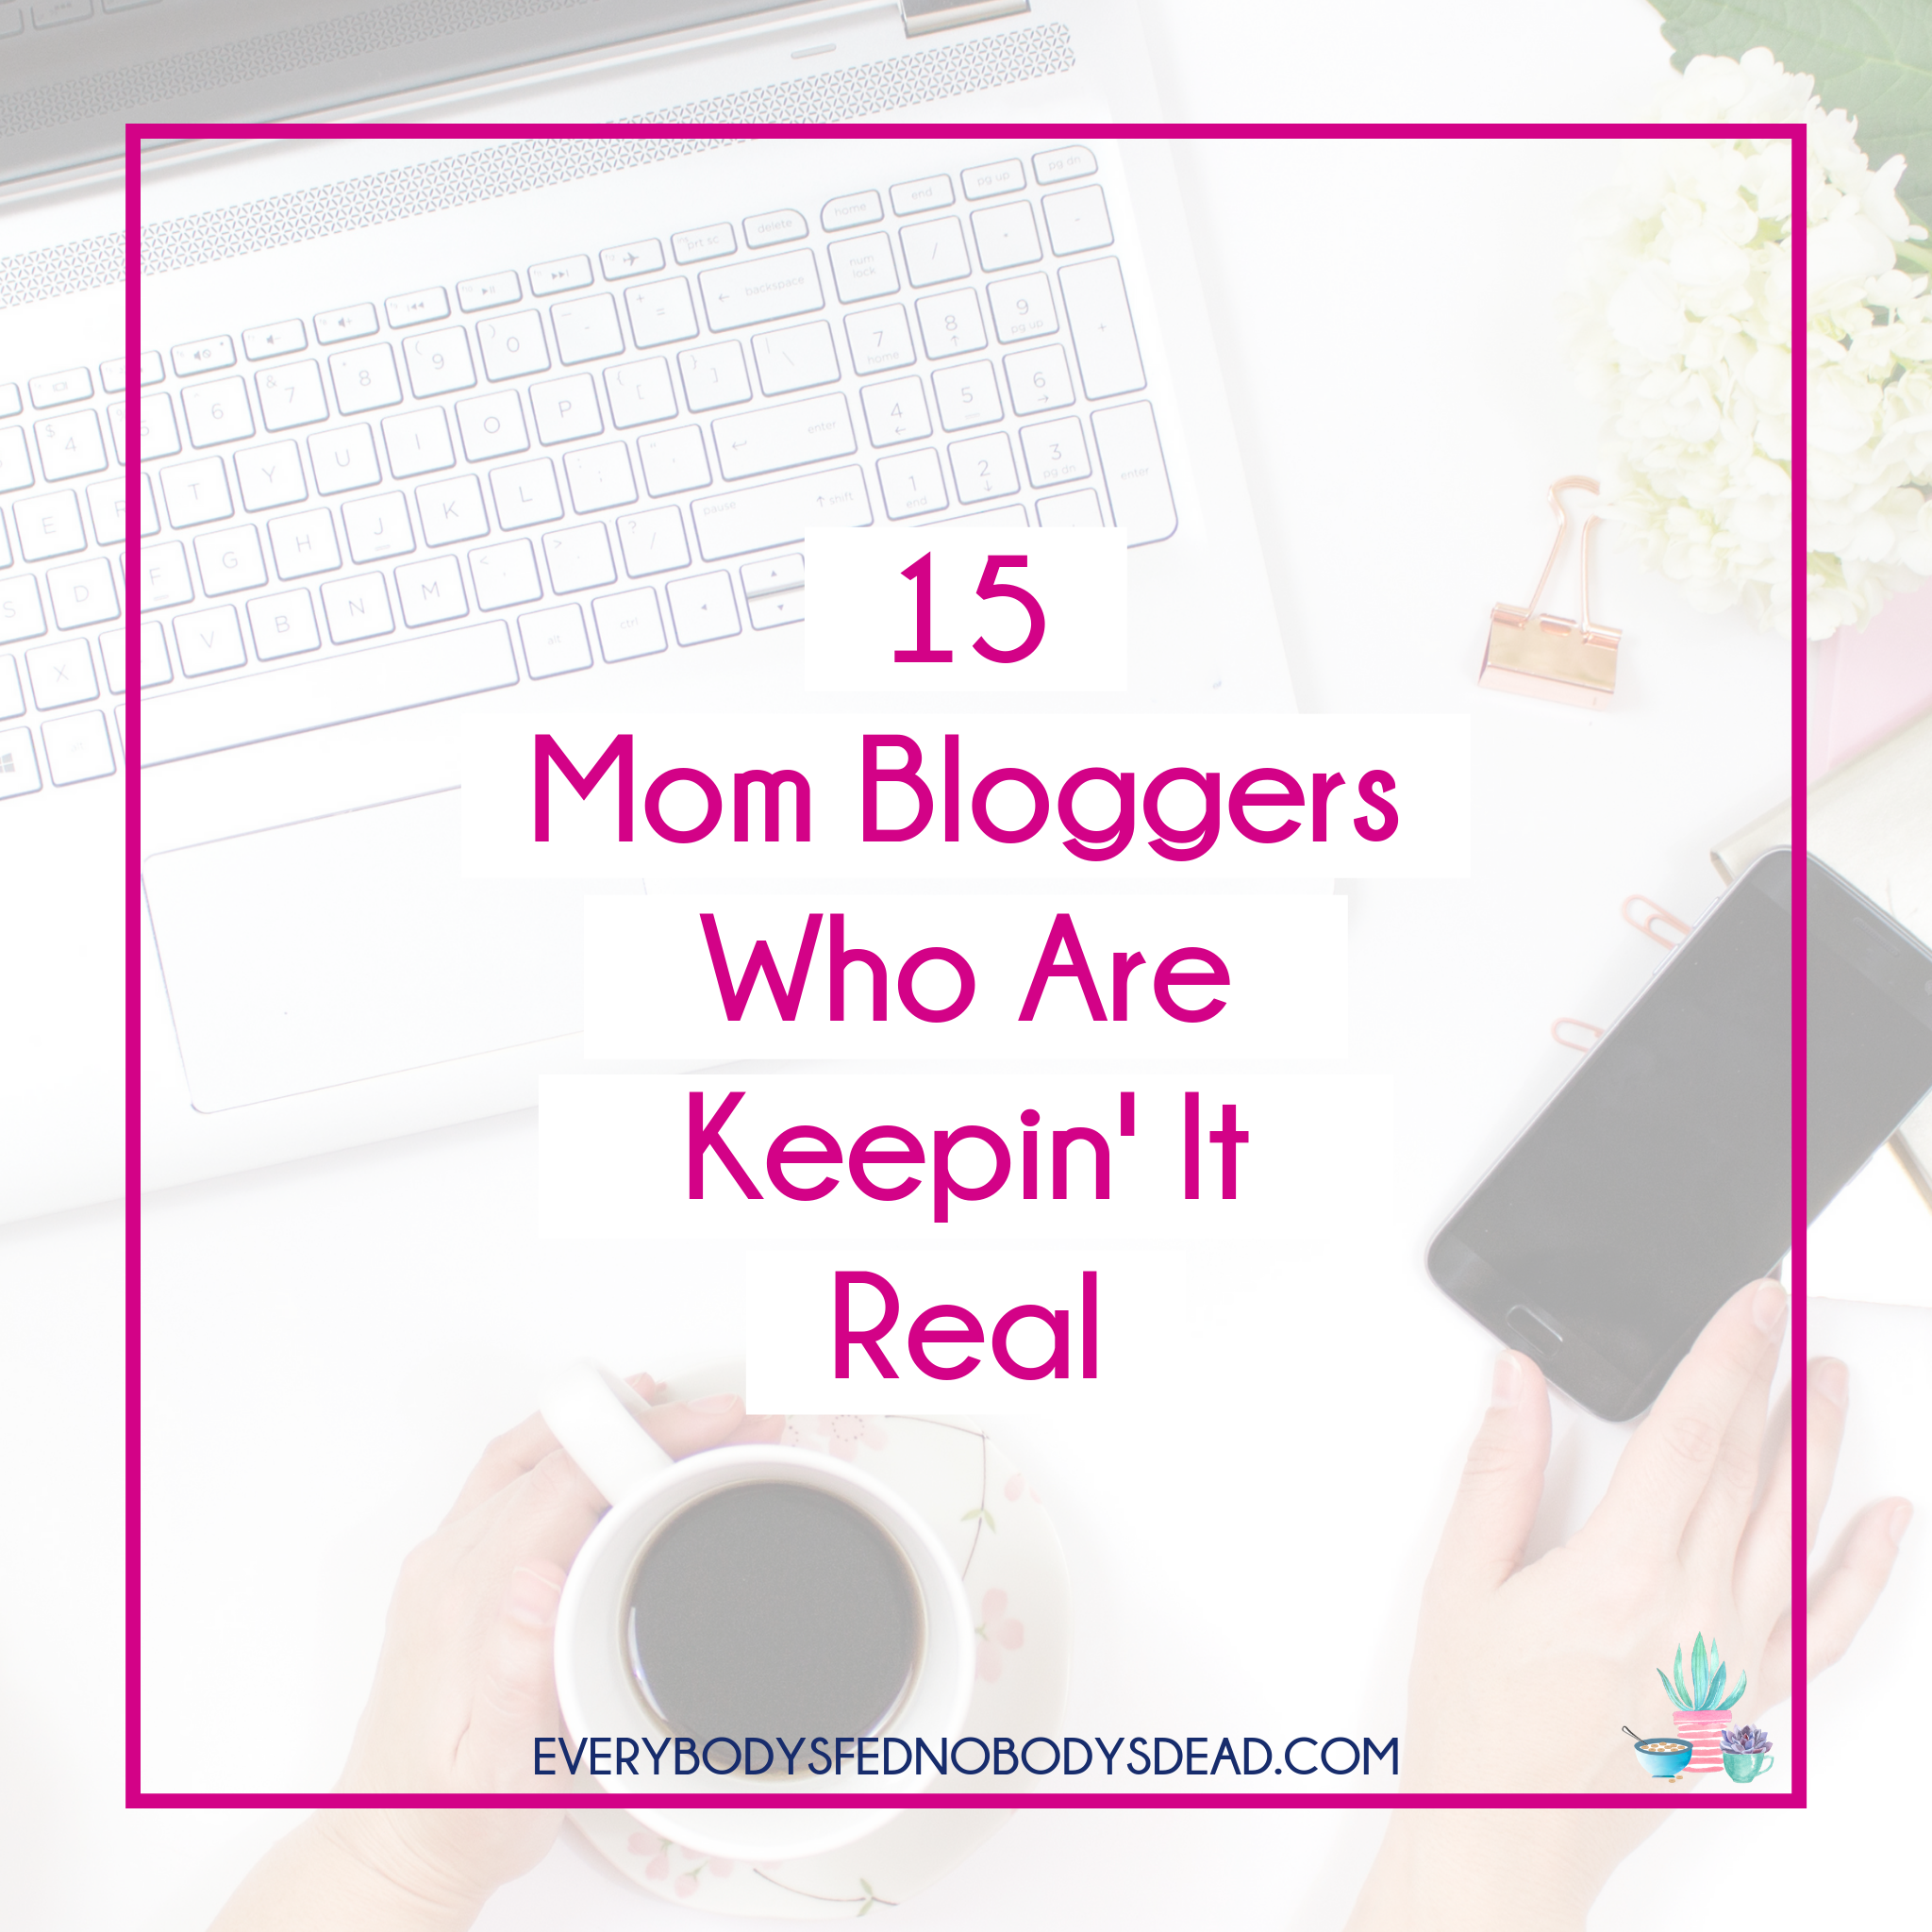 https://everybodysfednobodysdead.com/wp-content/uploads/2019/08/15-Mom-Bloggers-Who-Are-Keepin-It-Real-square.png